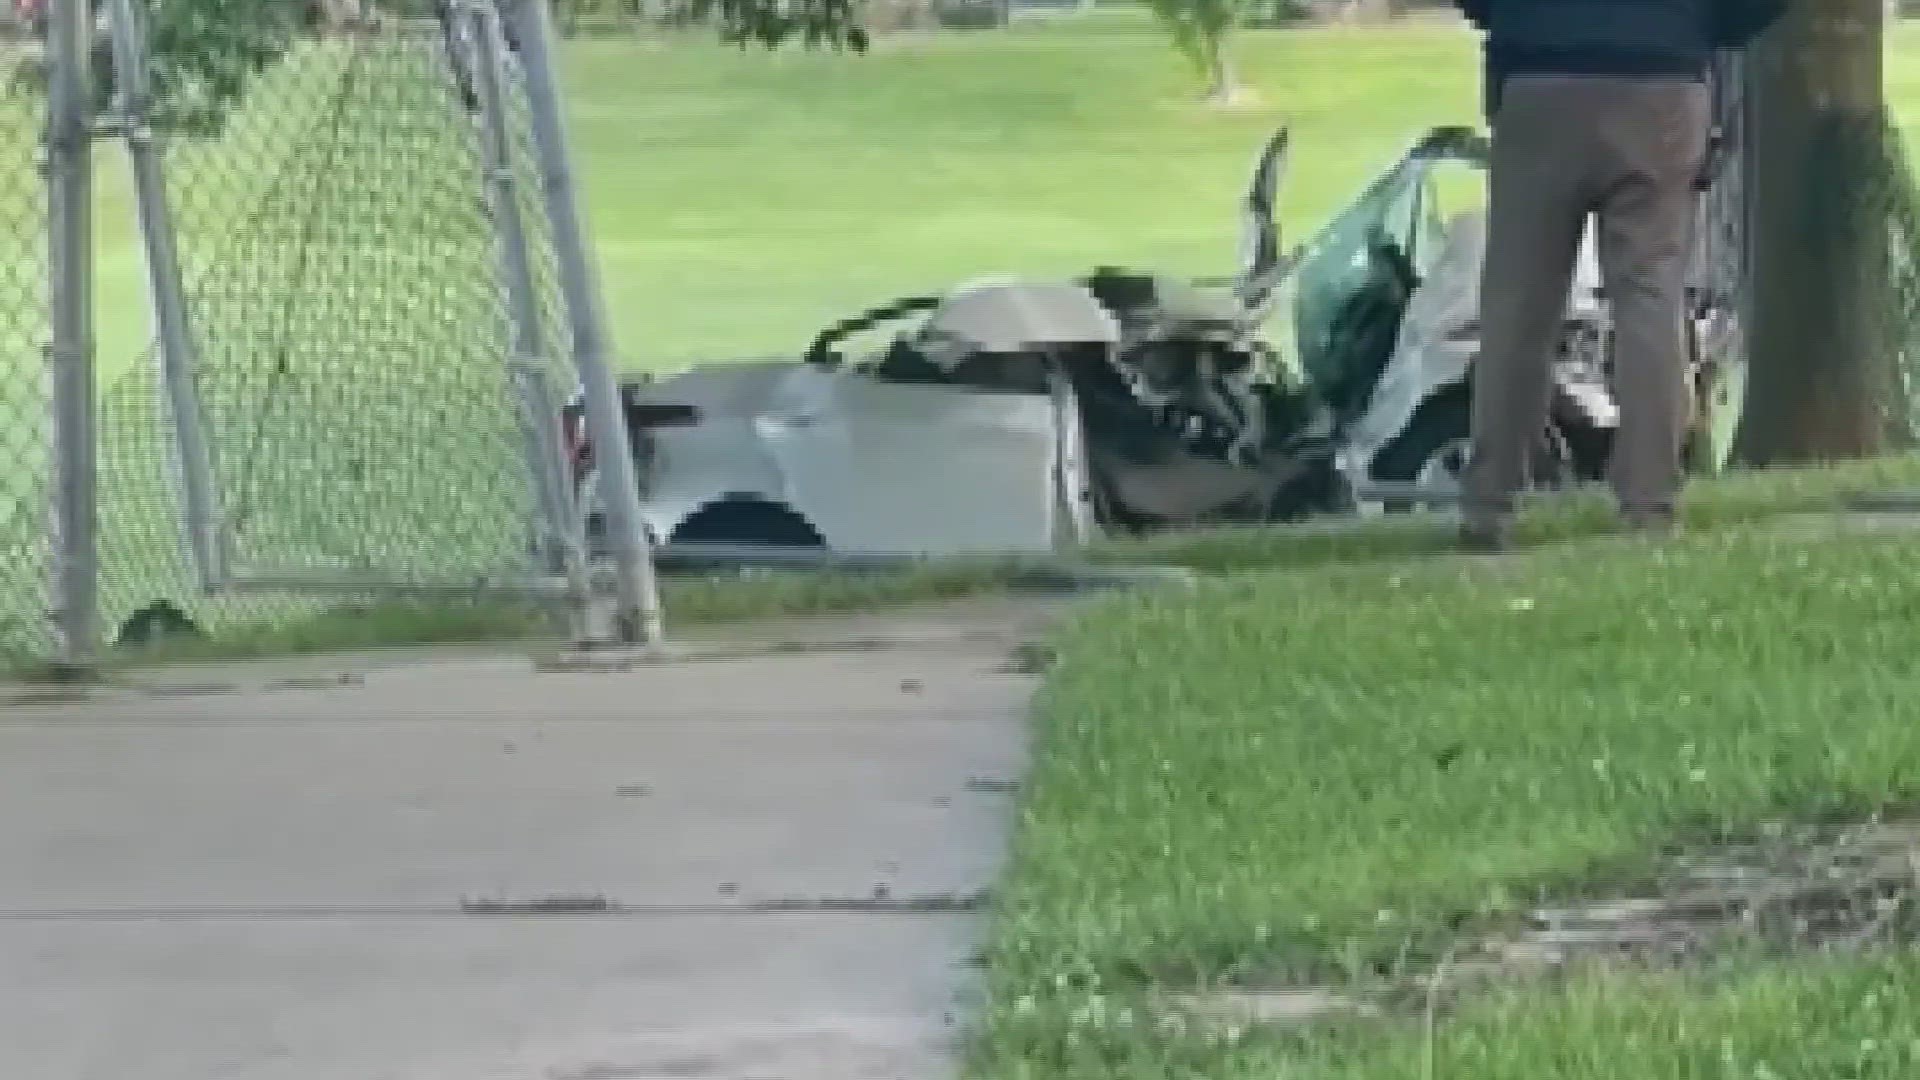 The police department says the vehicle was one they were chasing earlier in the night after a report of two suspicious men with flashlights.